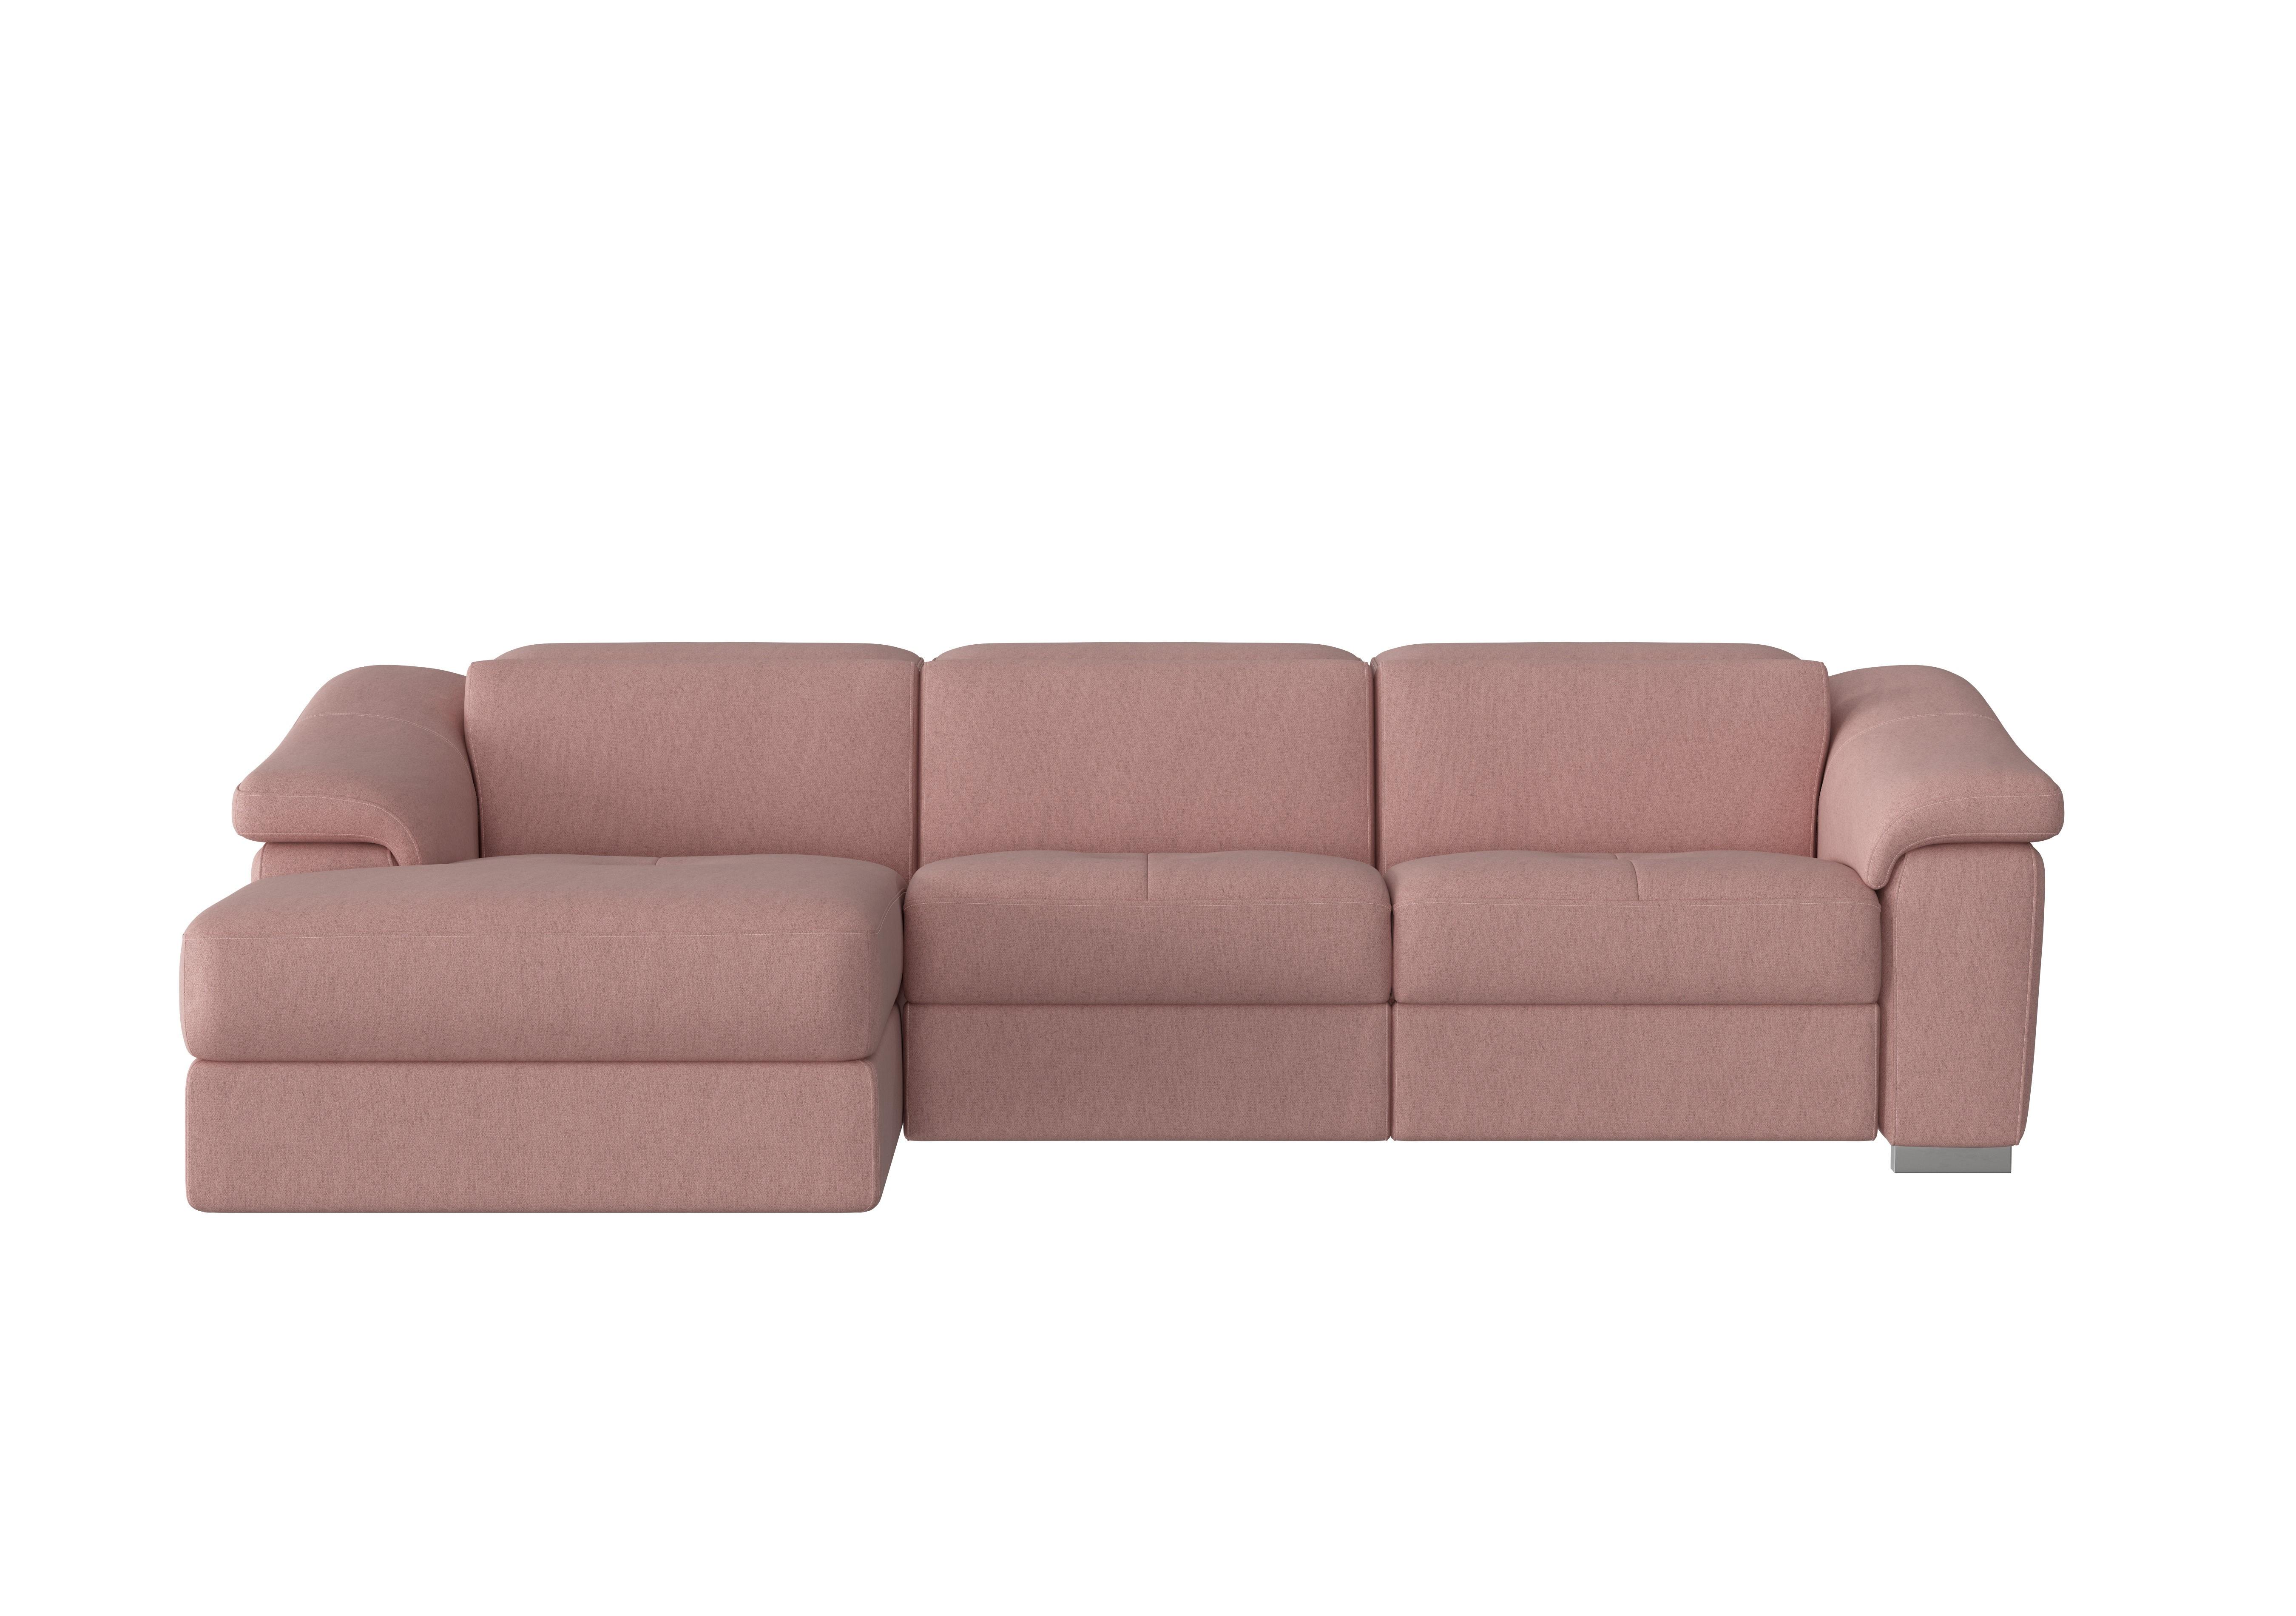 Galileo Fabric Chaise End Sofa in Fuente Coral Ch on Furniture Village